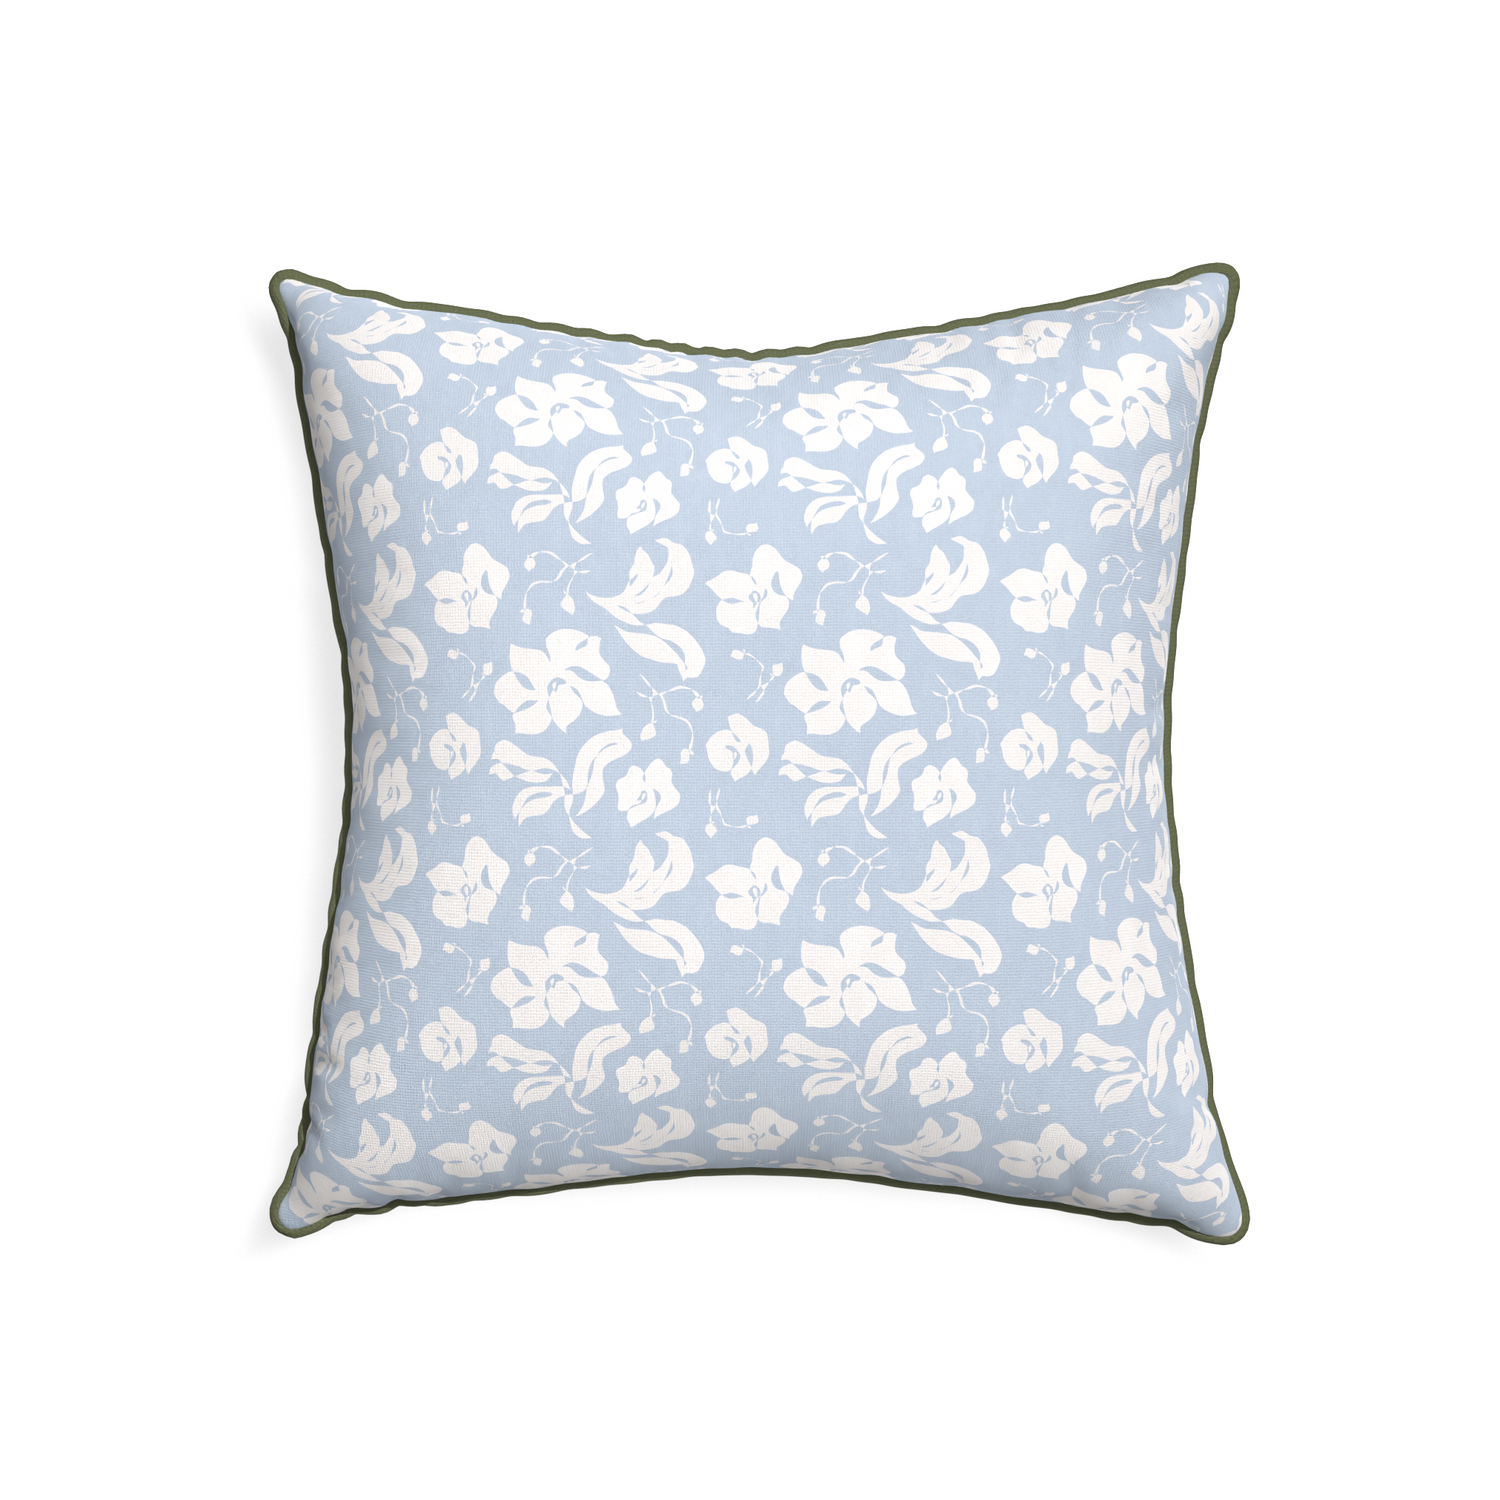 22-square georgia custom pillow with f piping on white background